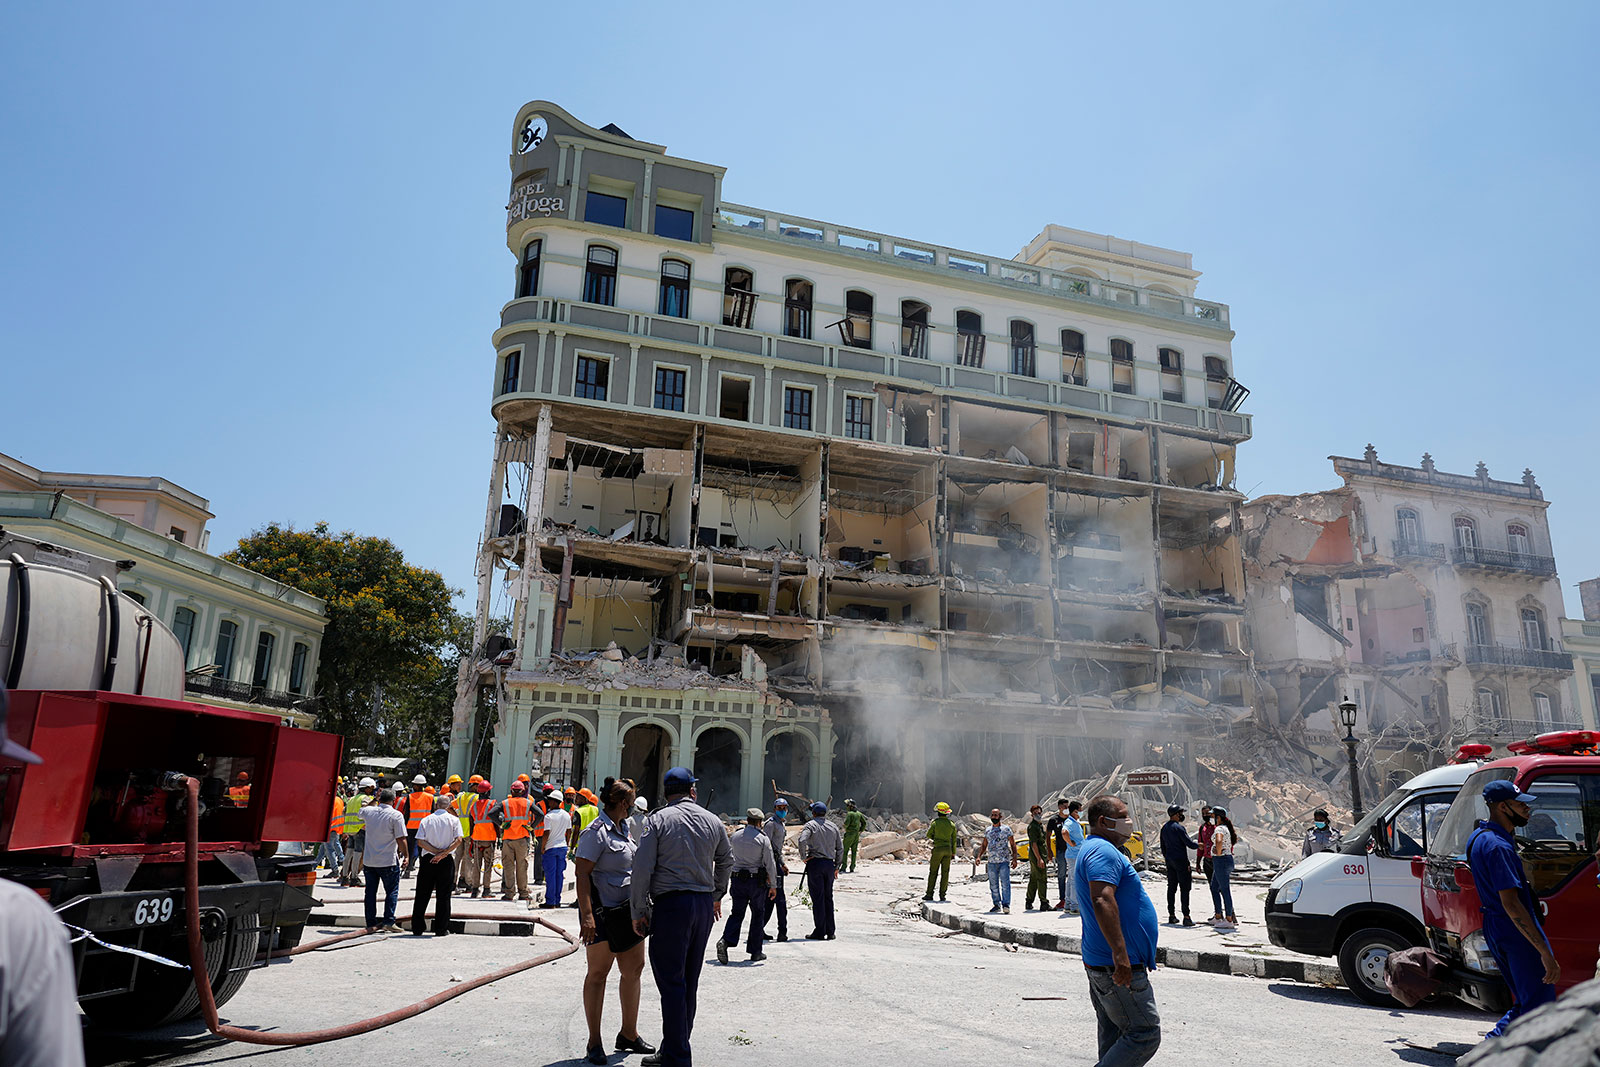 Rooms are seen exposed at the Hotel Saratoga where emergency crews work after a deadly explosion in Havana, Cuba, on Friday, May 6.